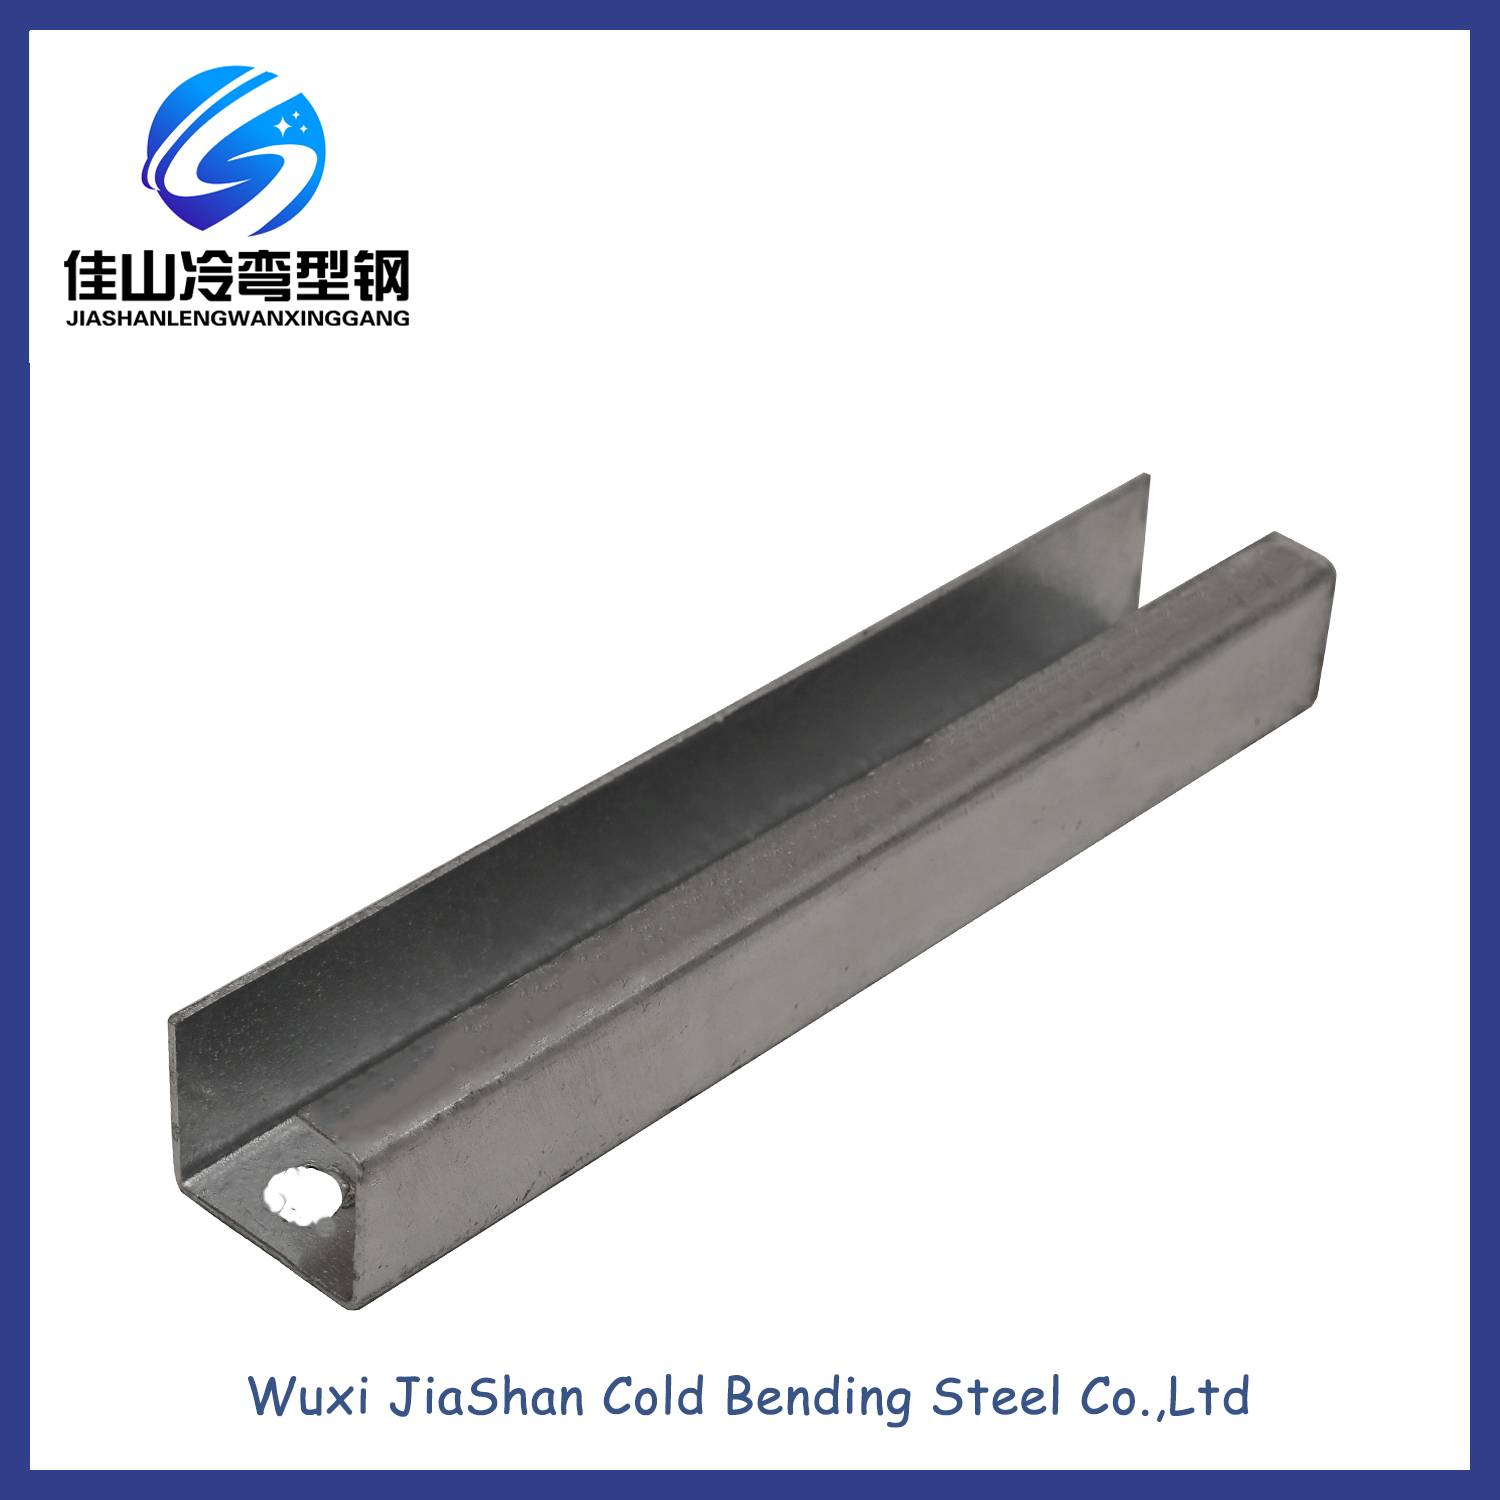 White Zinc Painting Lip C Channel Steel Q345 Featured Image